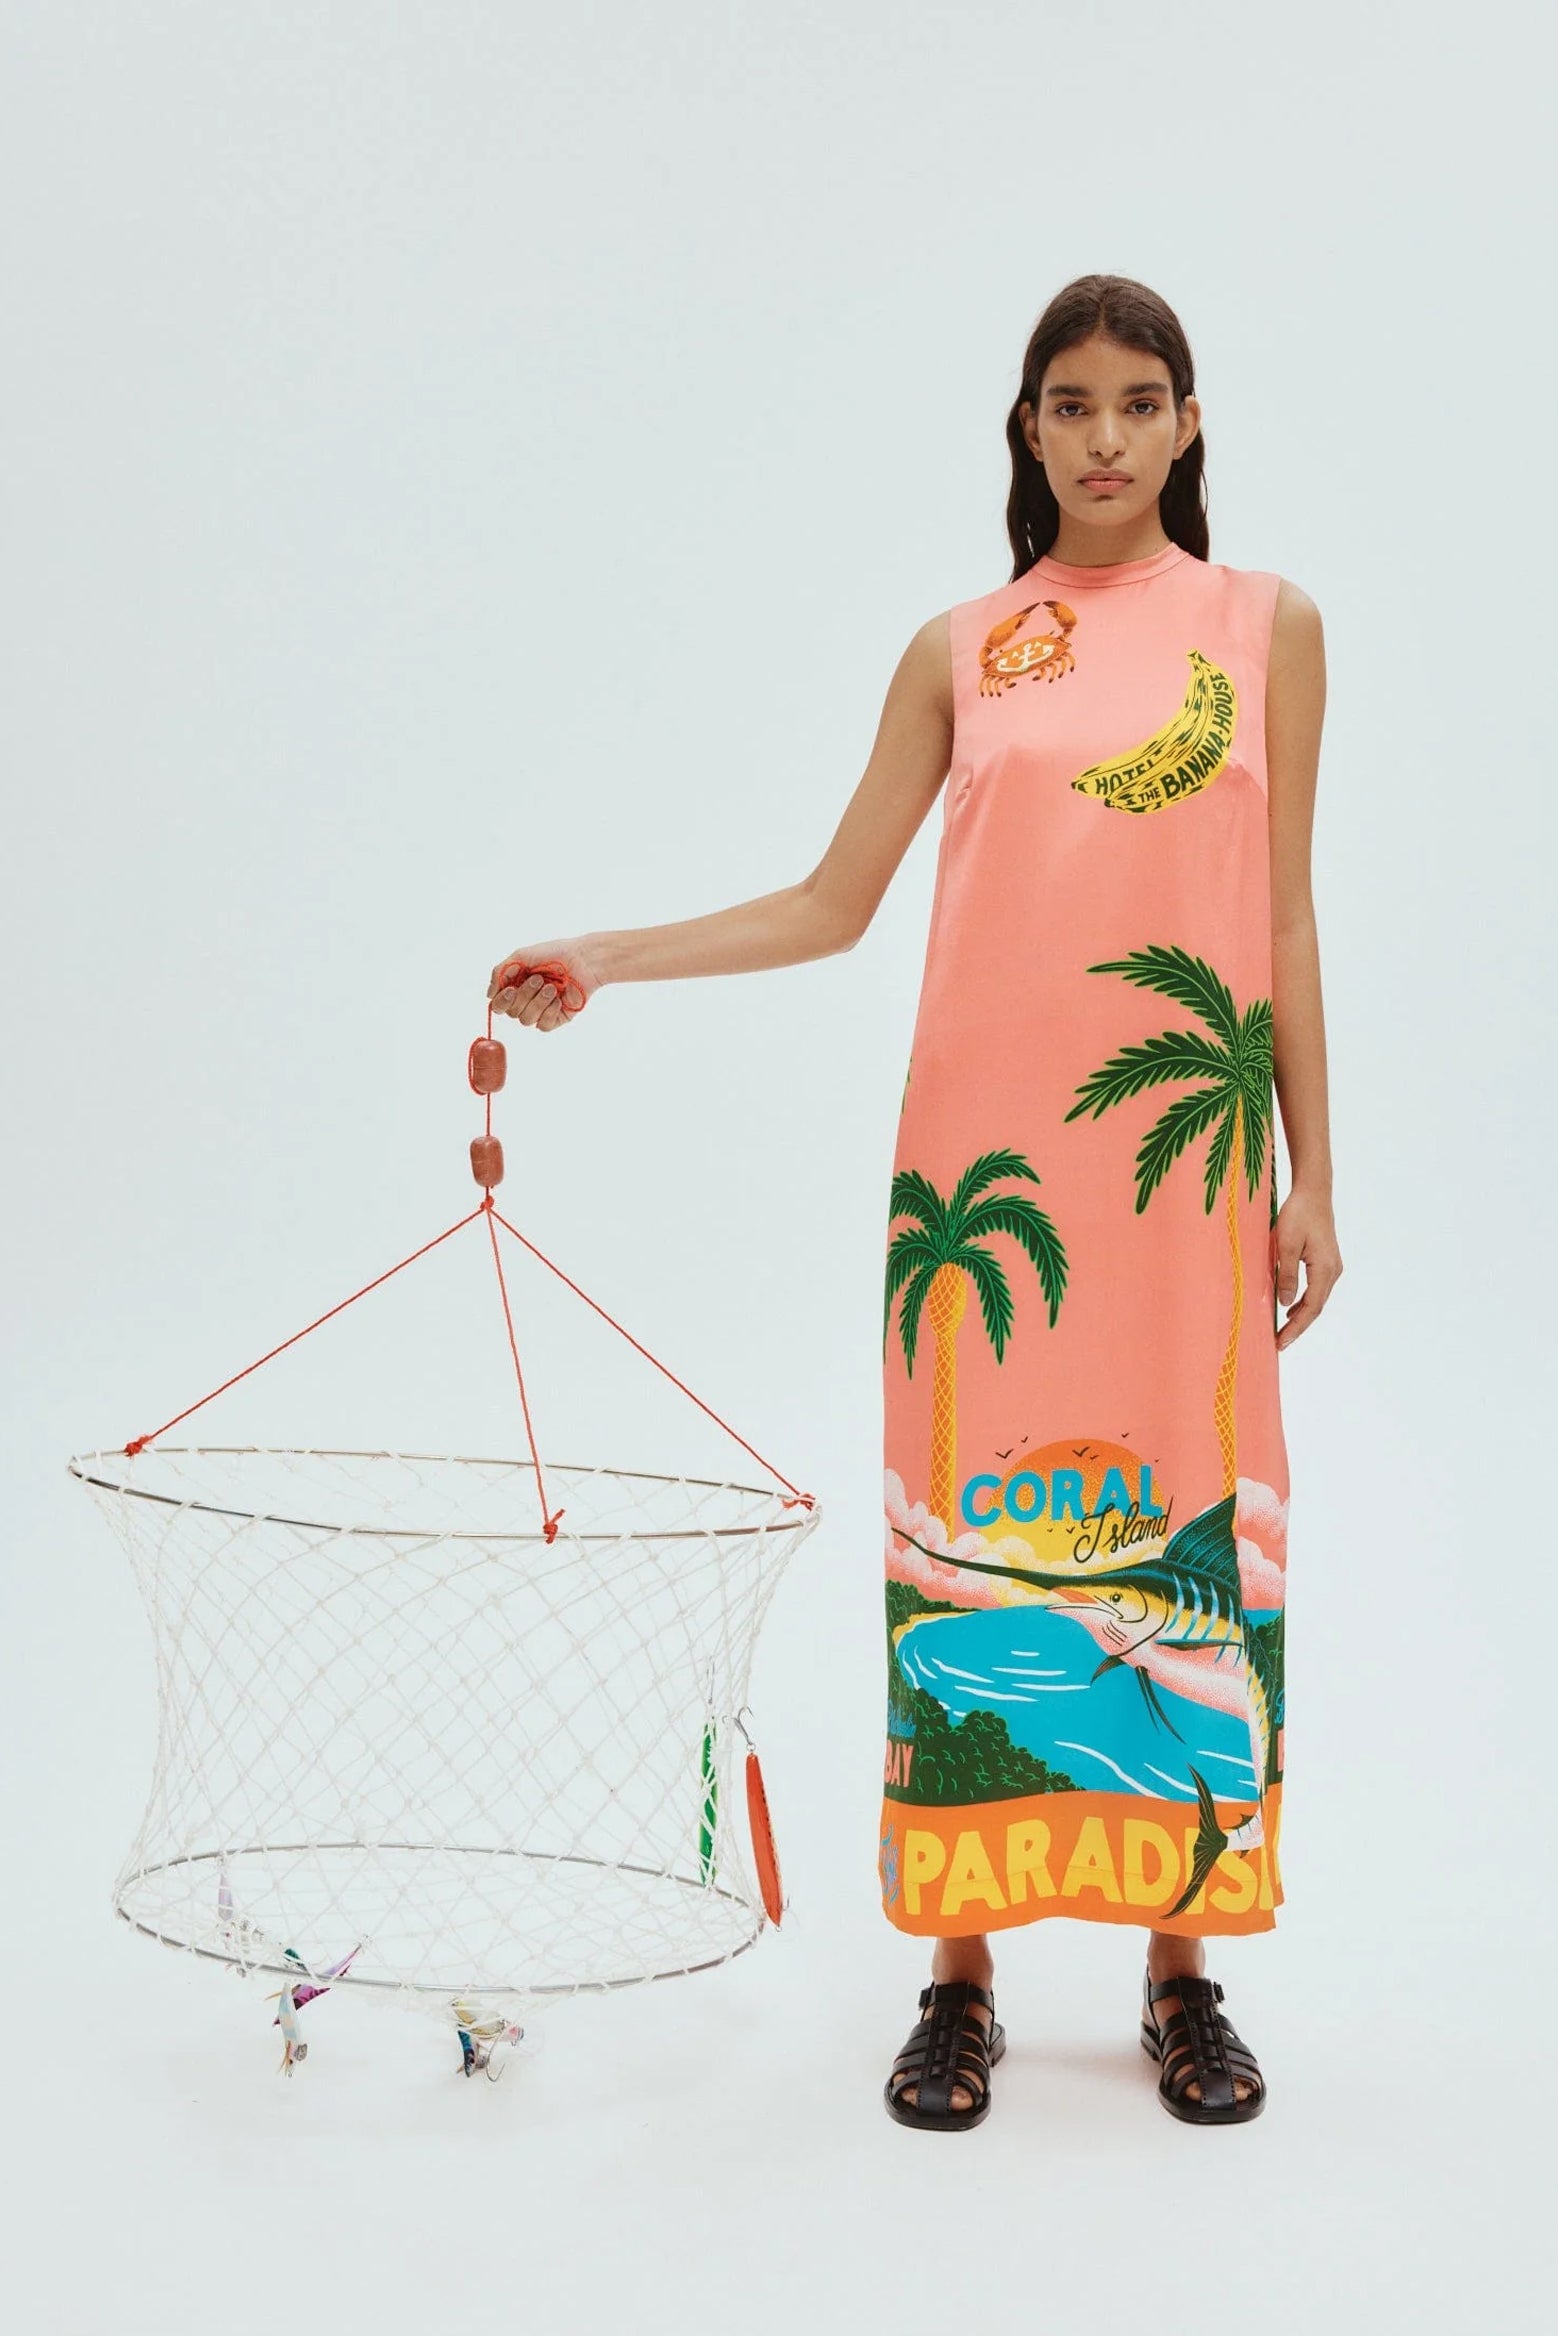 Alemais Paradiso Silk Midi Dress in Multi available at The New Trend Australia.